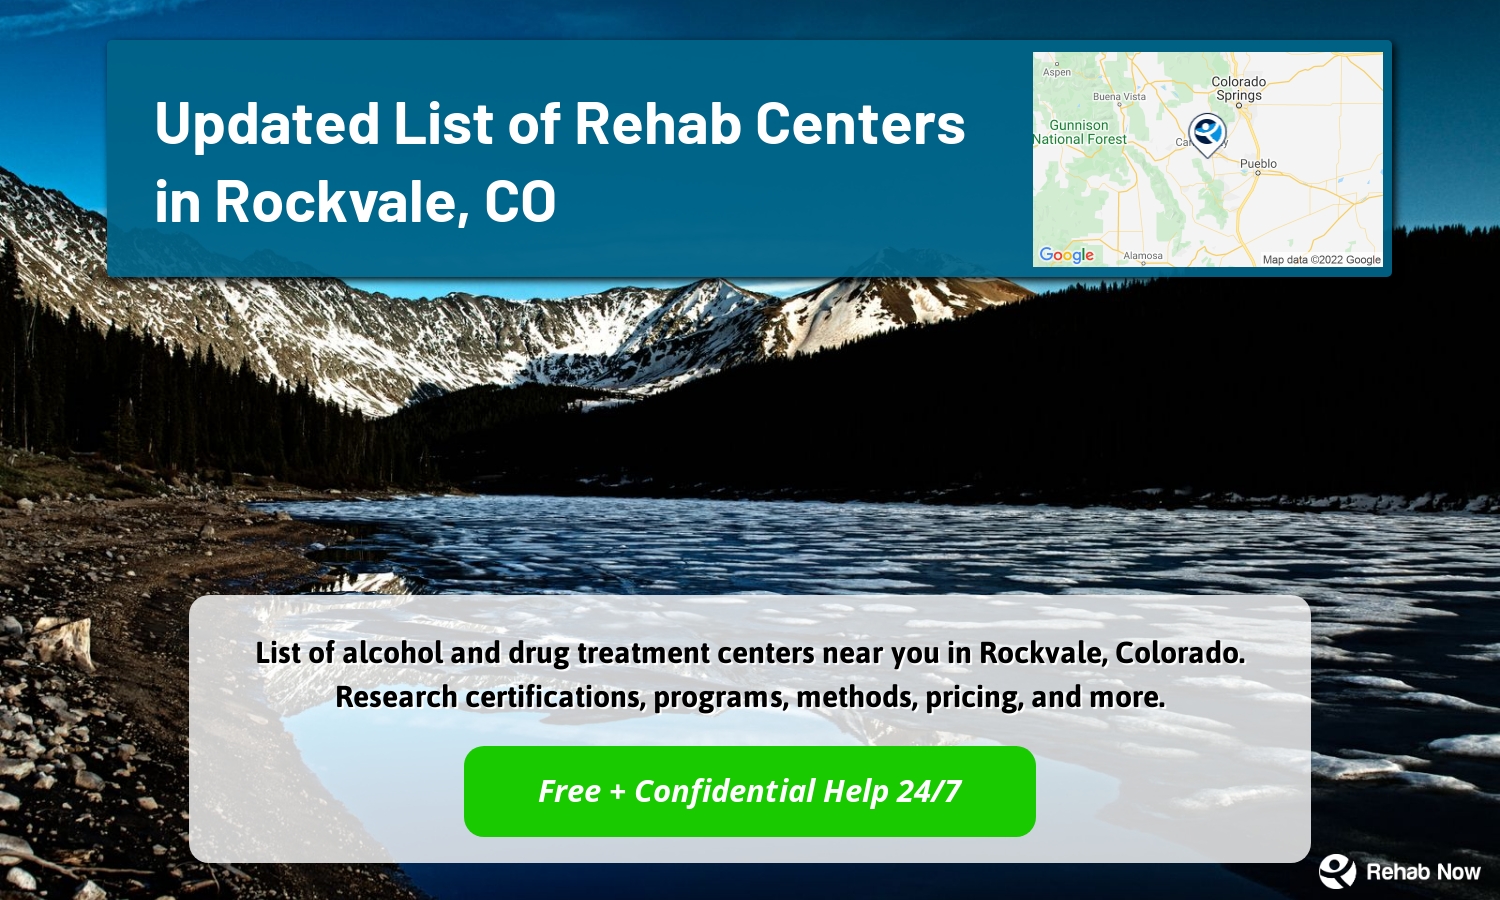 List of alcohol and drug treatment centers near you in Rockvale, Colorado. Research certifications, programs, methods, pricing, and more.